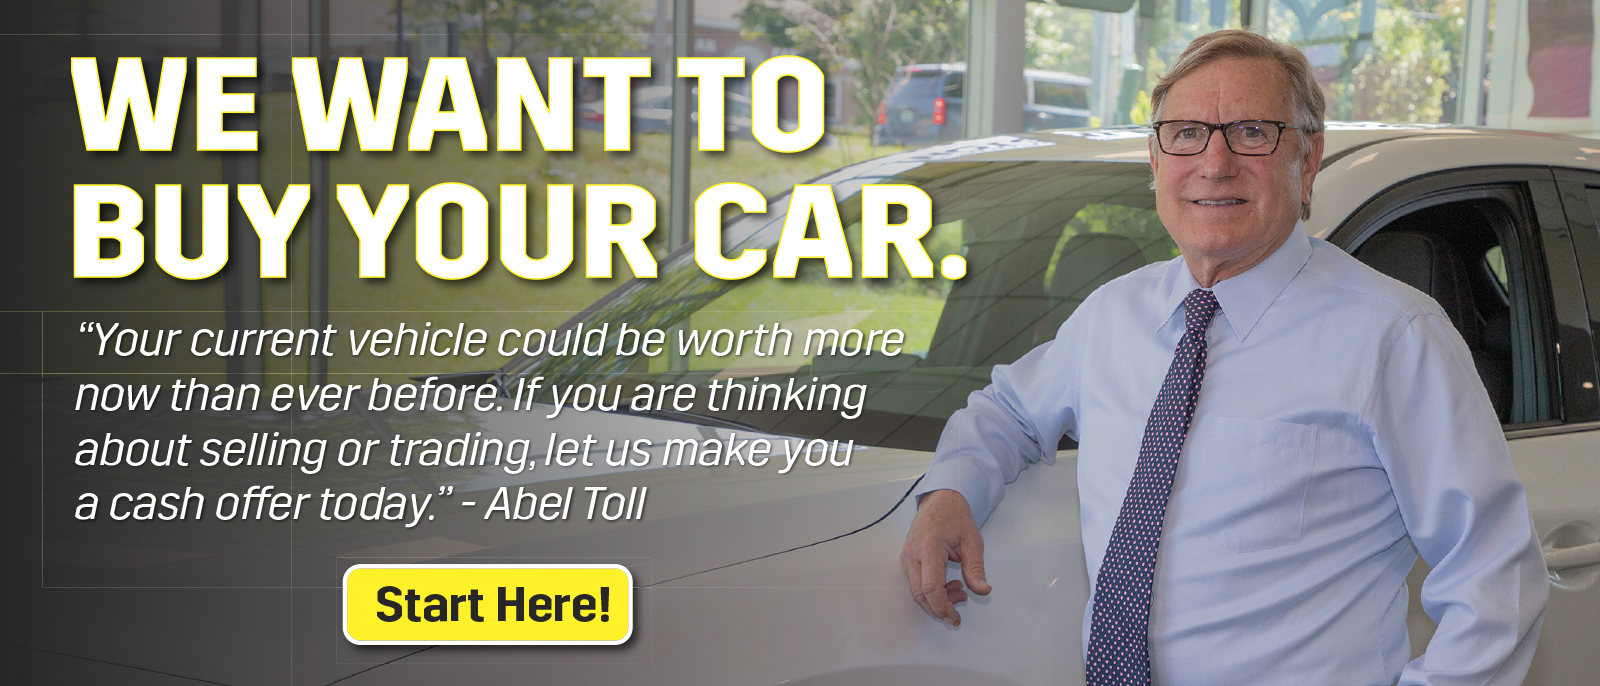 We want to buy your car! 